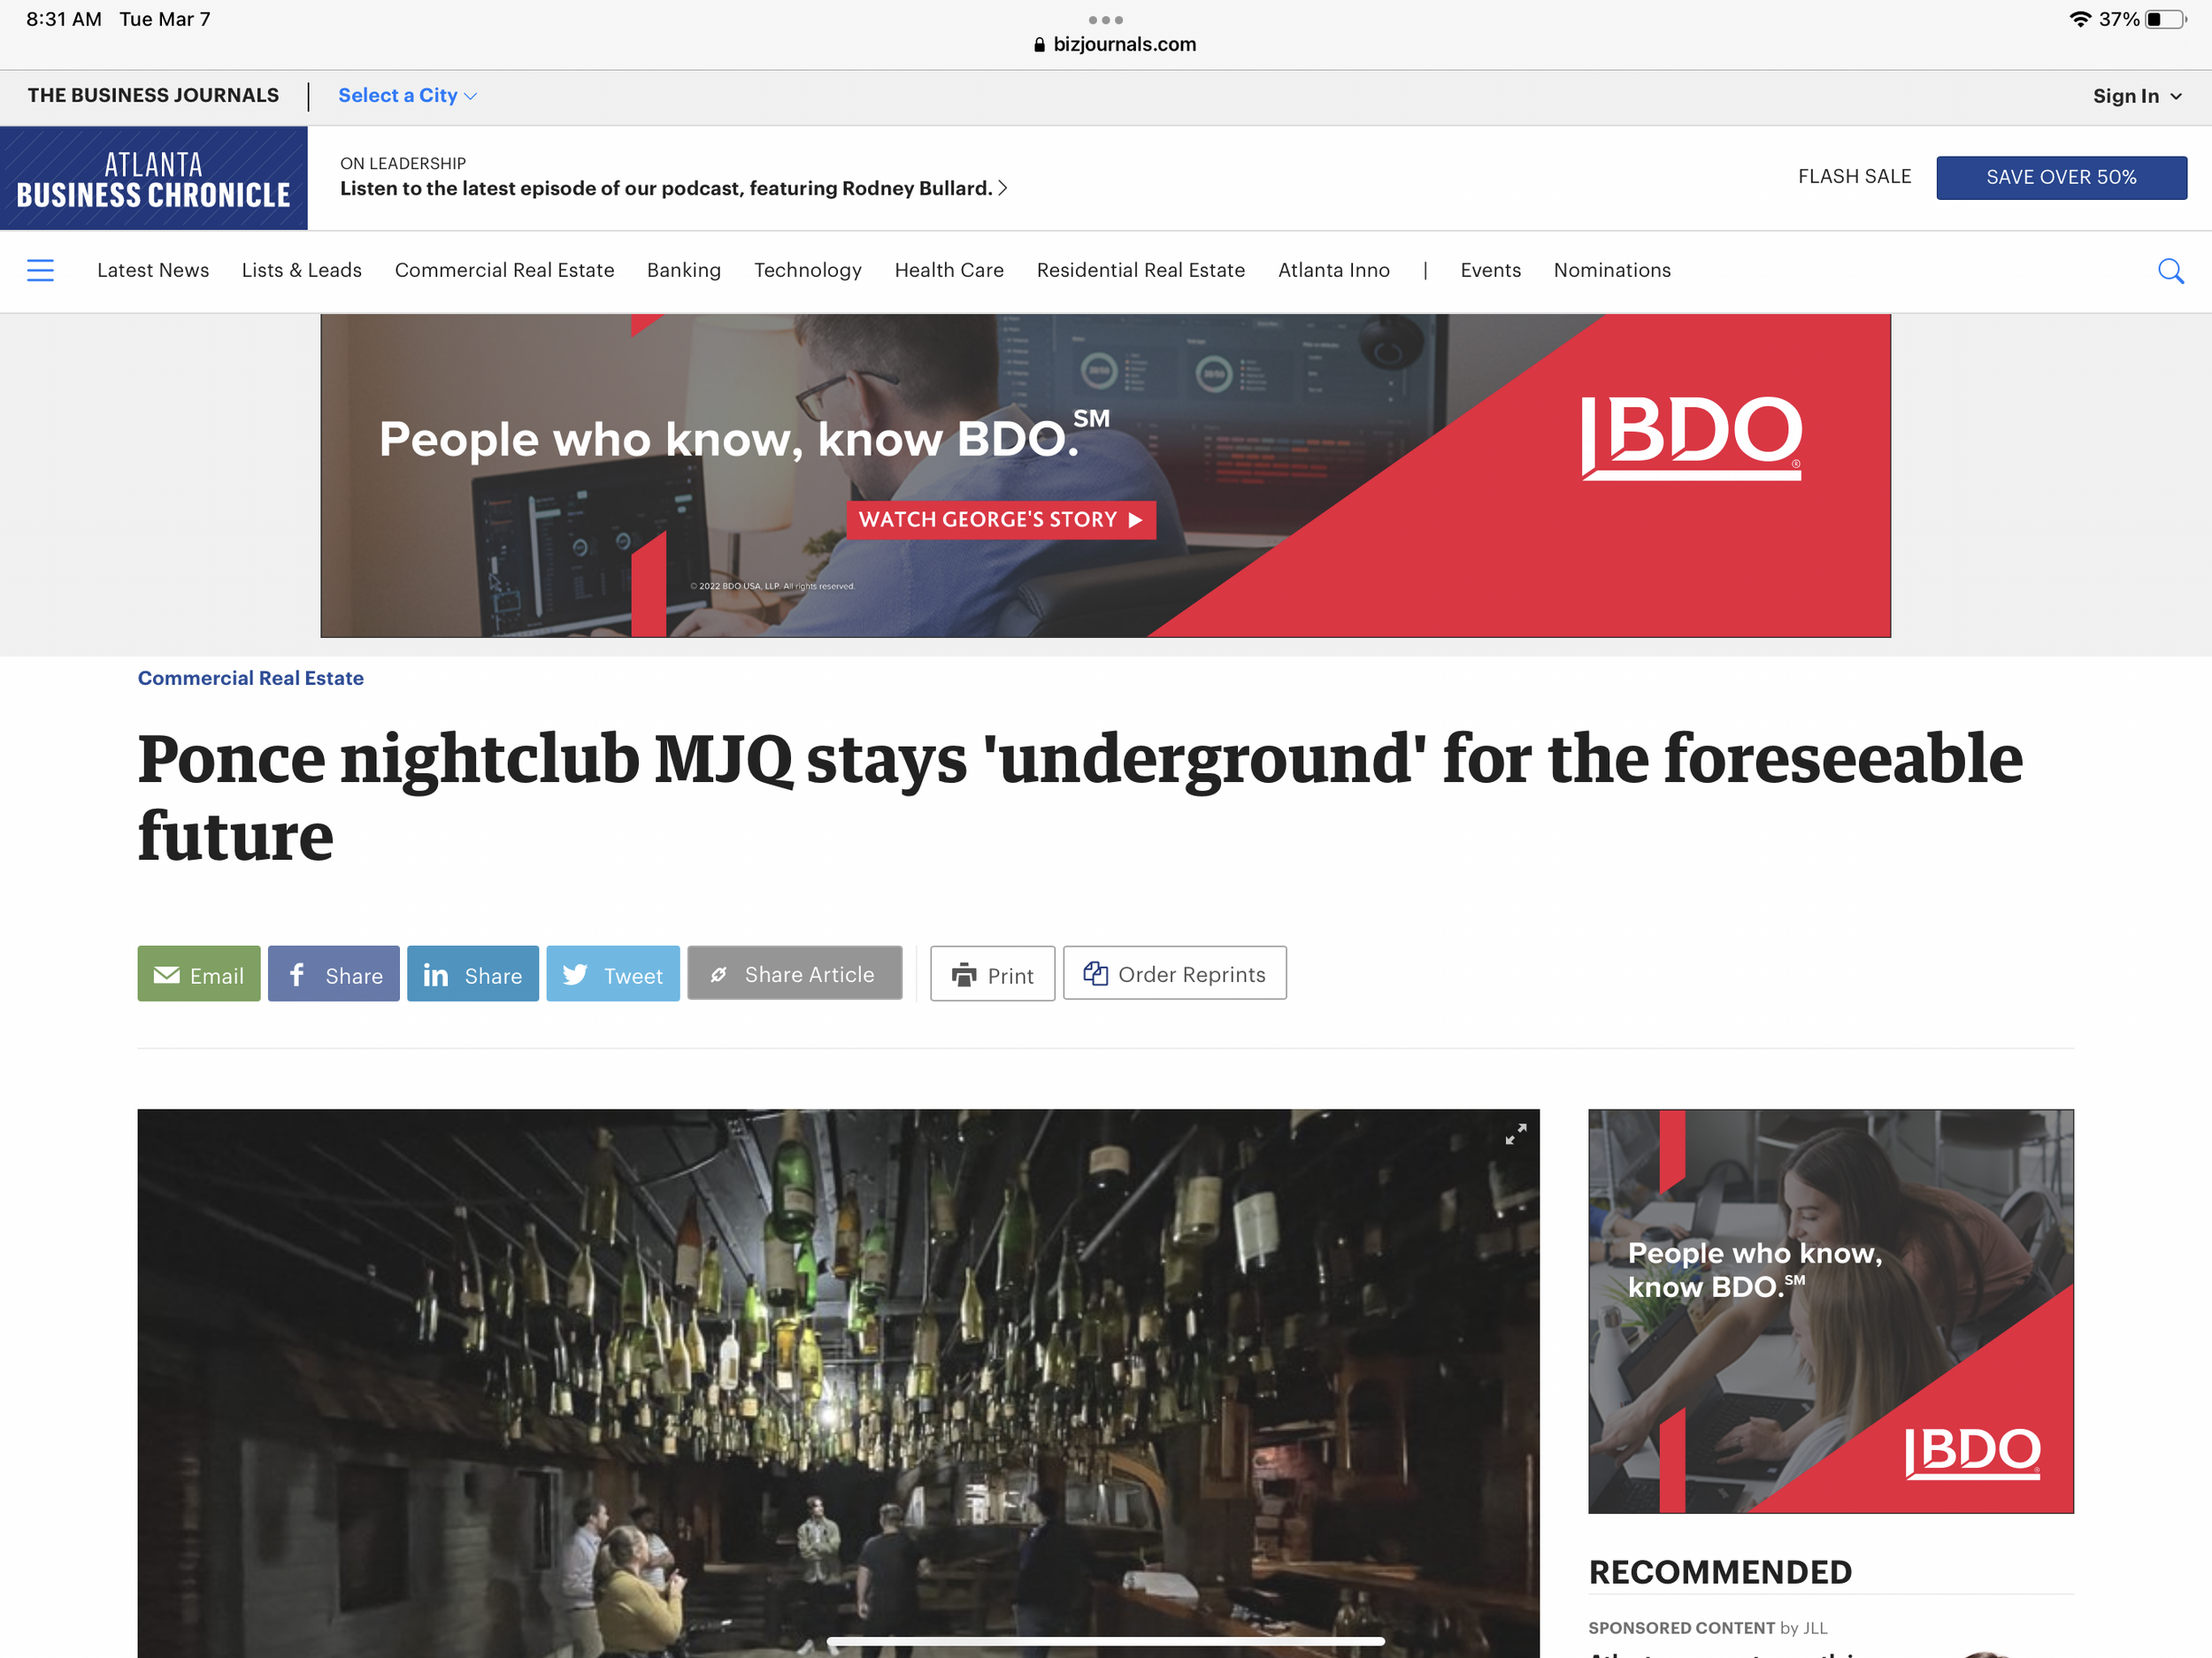 Ponce nightclub stays “underground” for the foreseeable future 